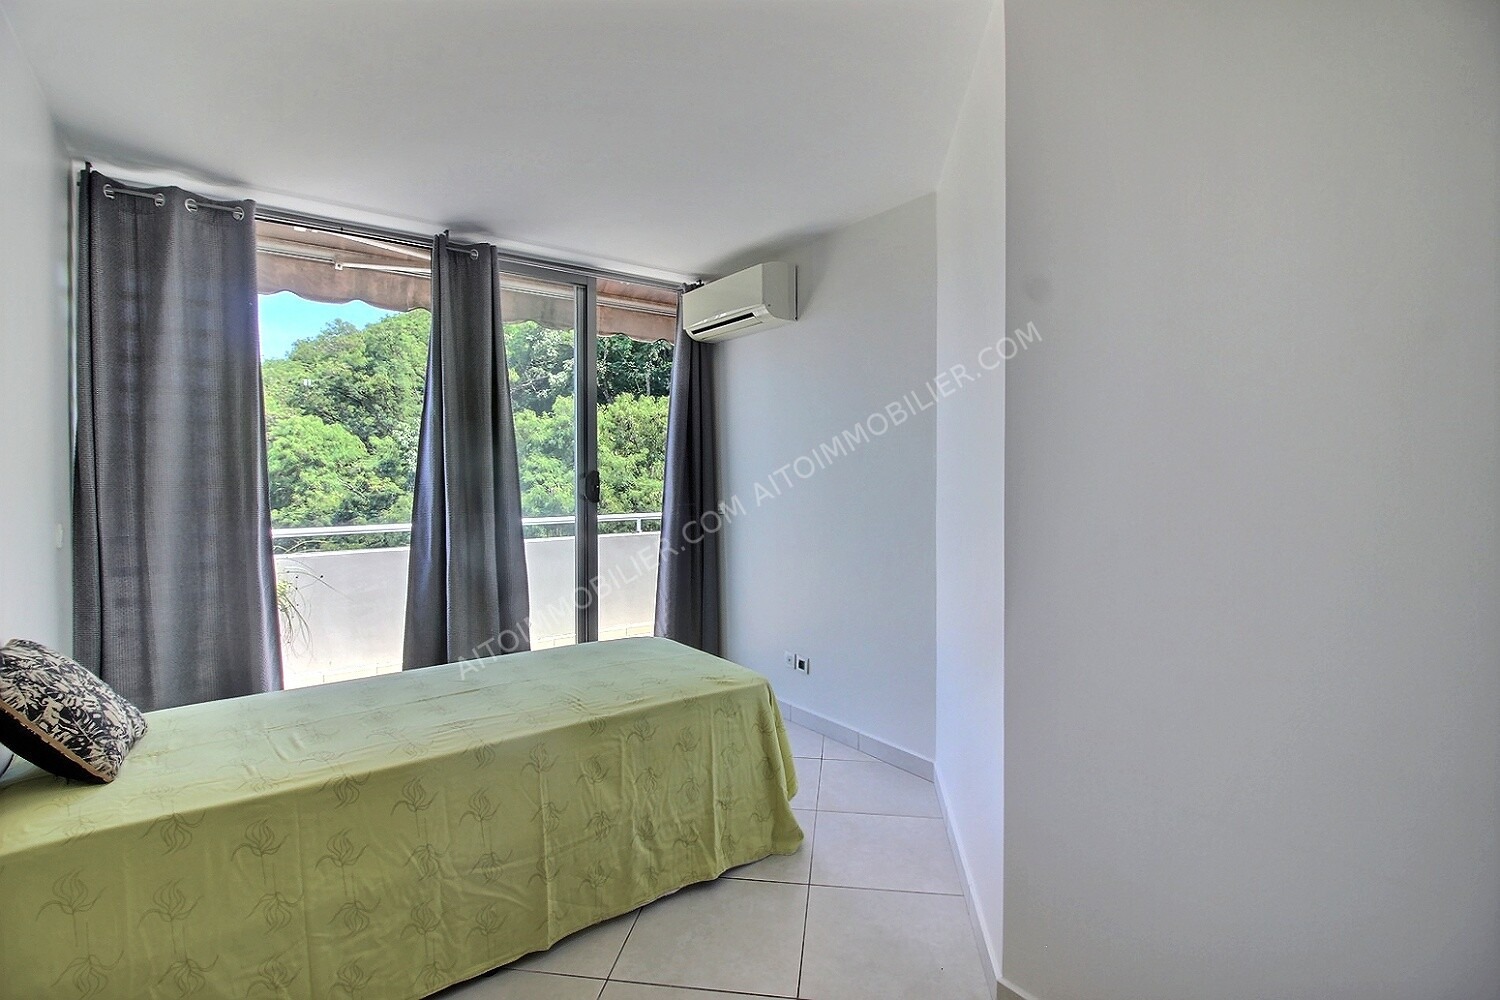 Location Appartement F4 - PUNAAUIA 9